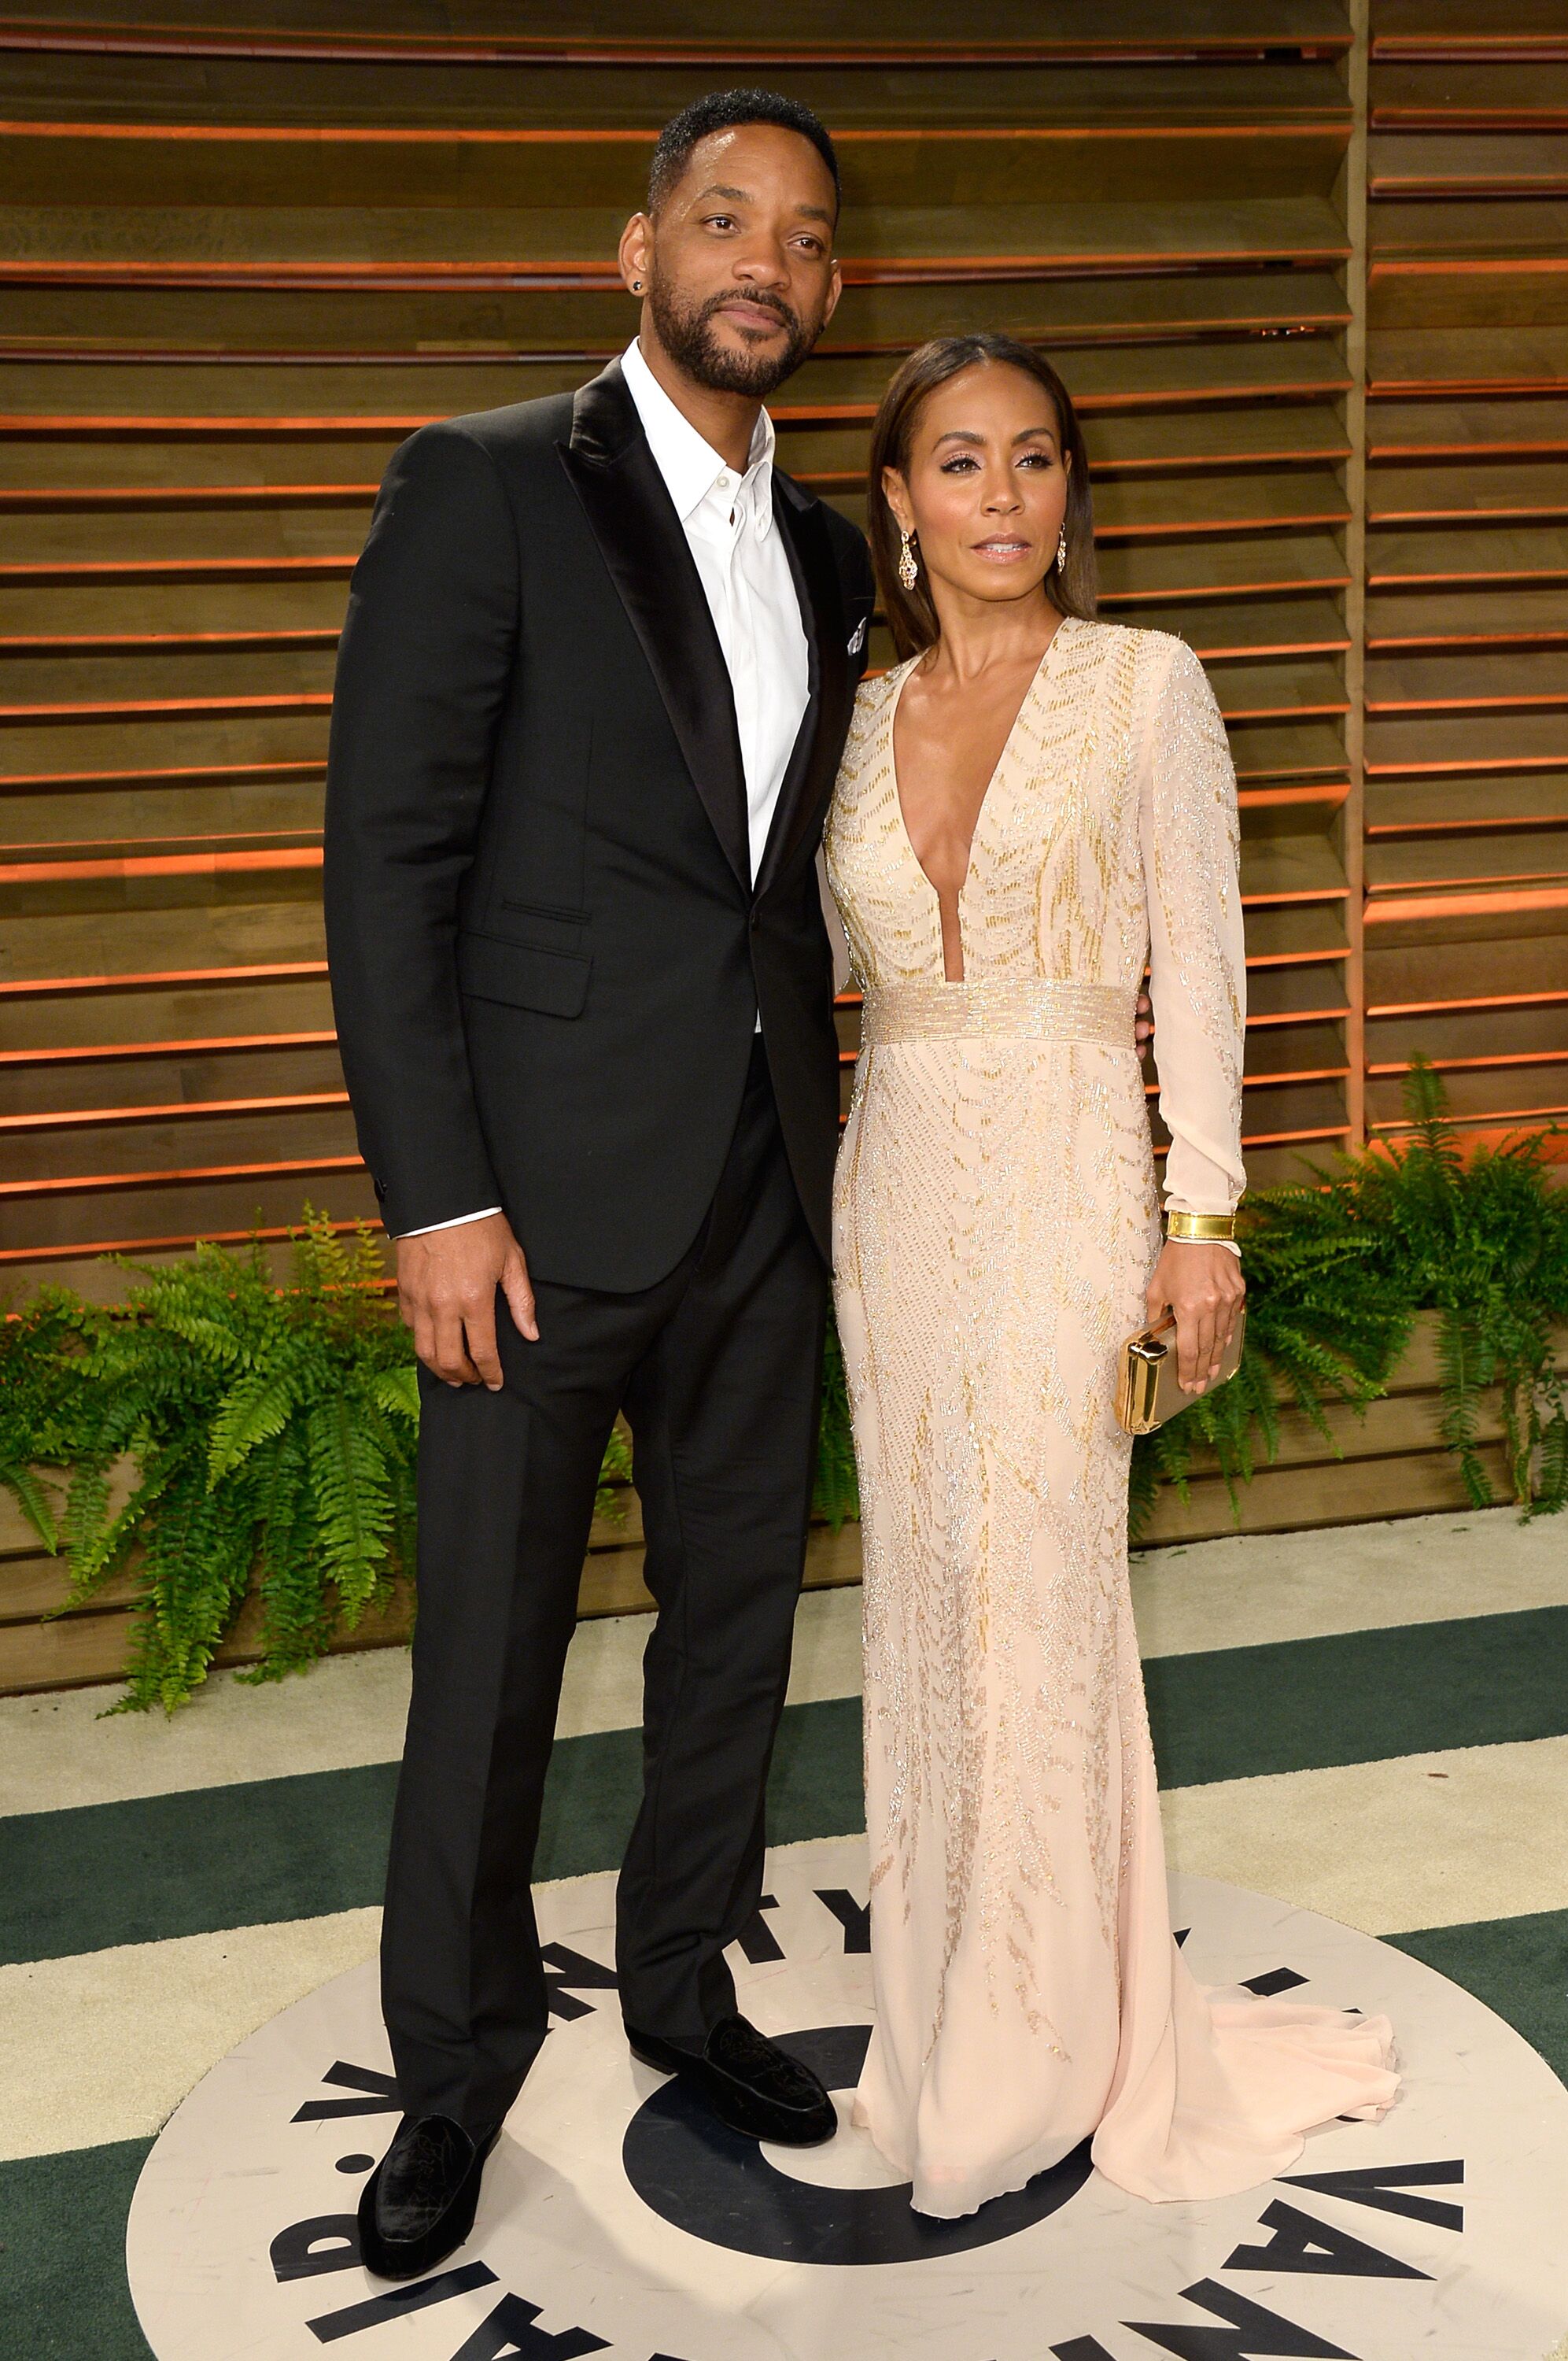 Will and Jada Pinkett-Smith at the 2014 Vanity Fair Oscars Party | Source: Getty Images/GlobalImagesUkraine